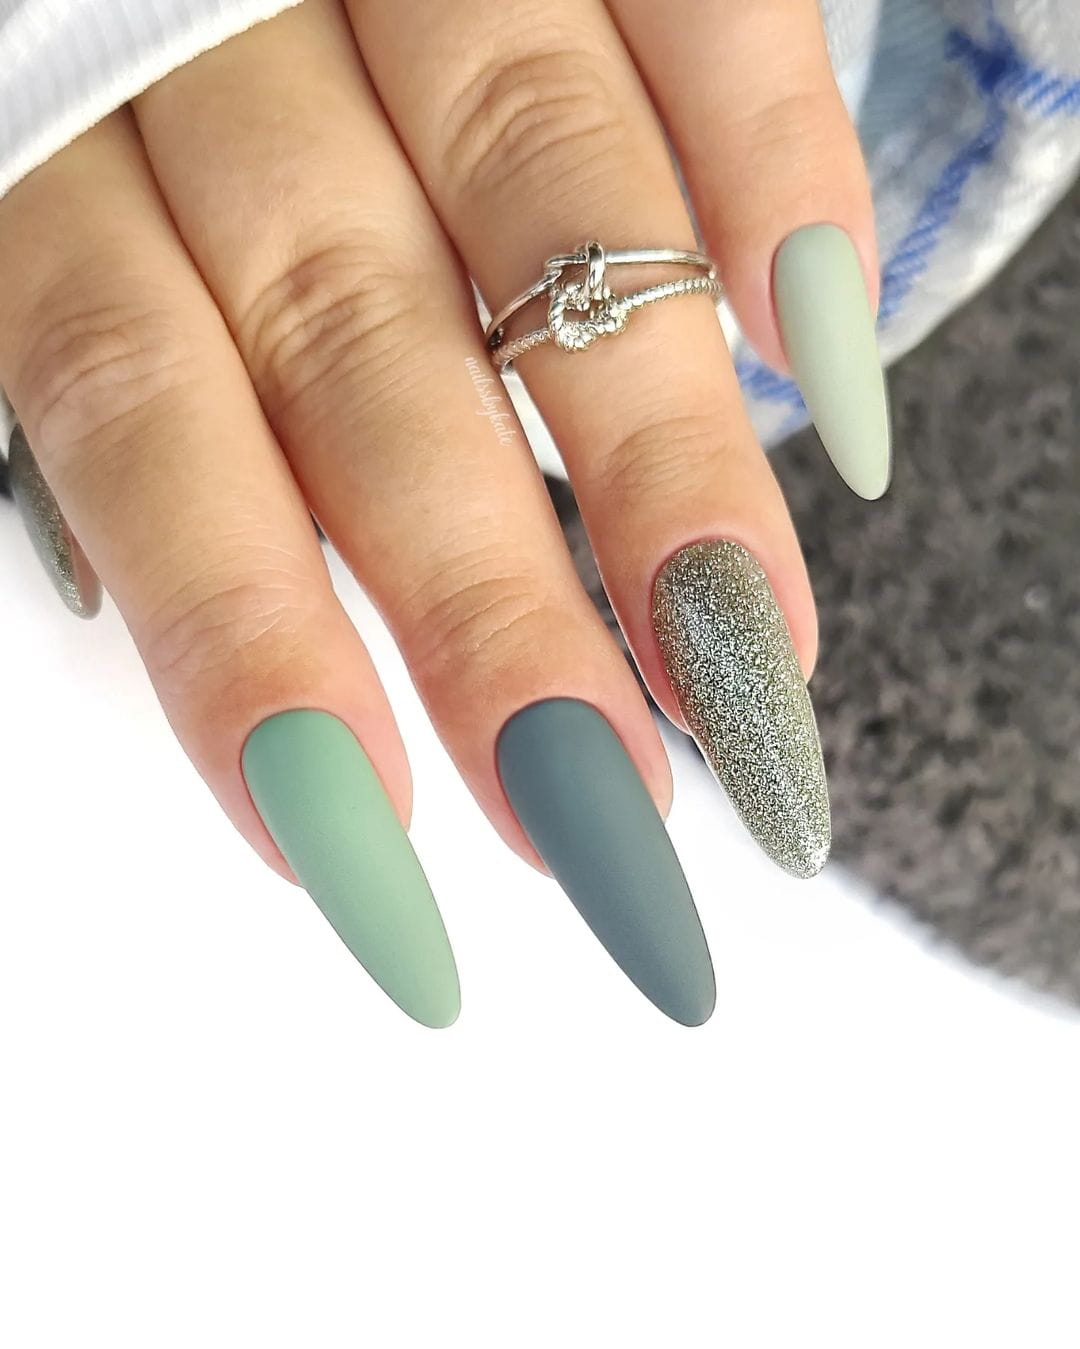 100+ Best Winter Nail Ideas And Designs To Try images 12